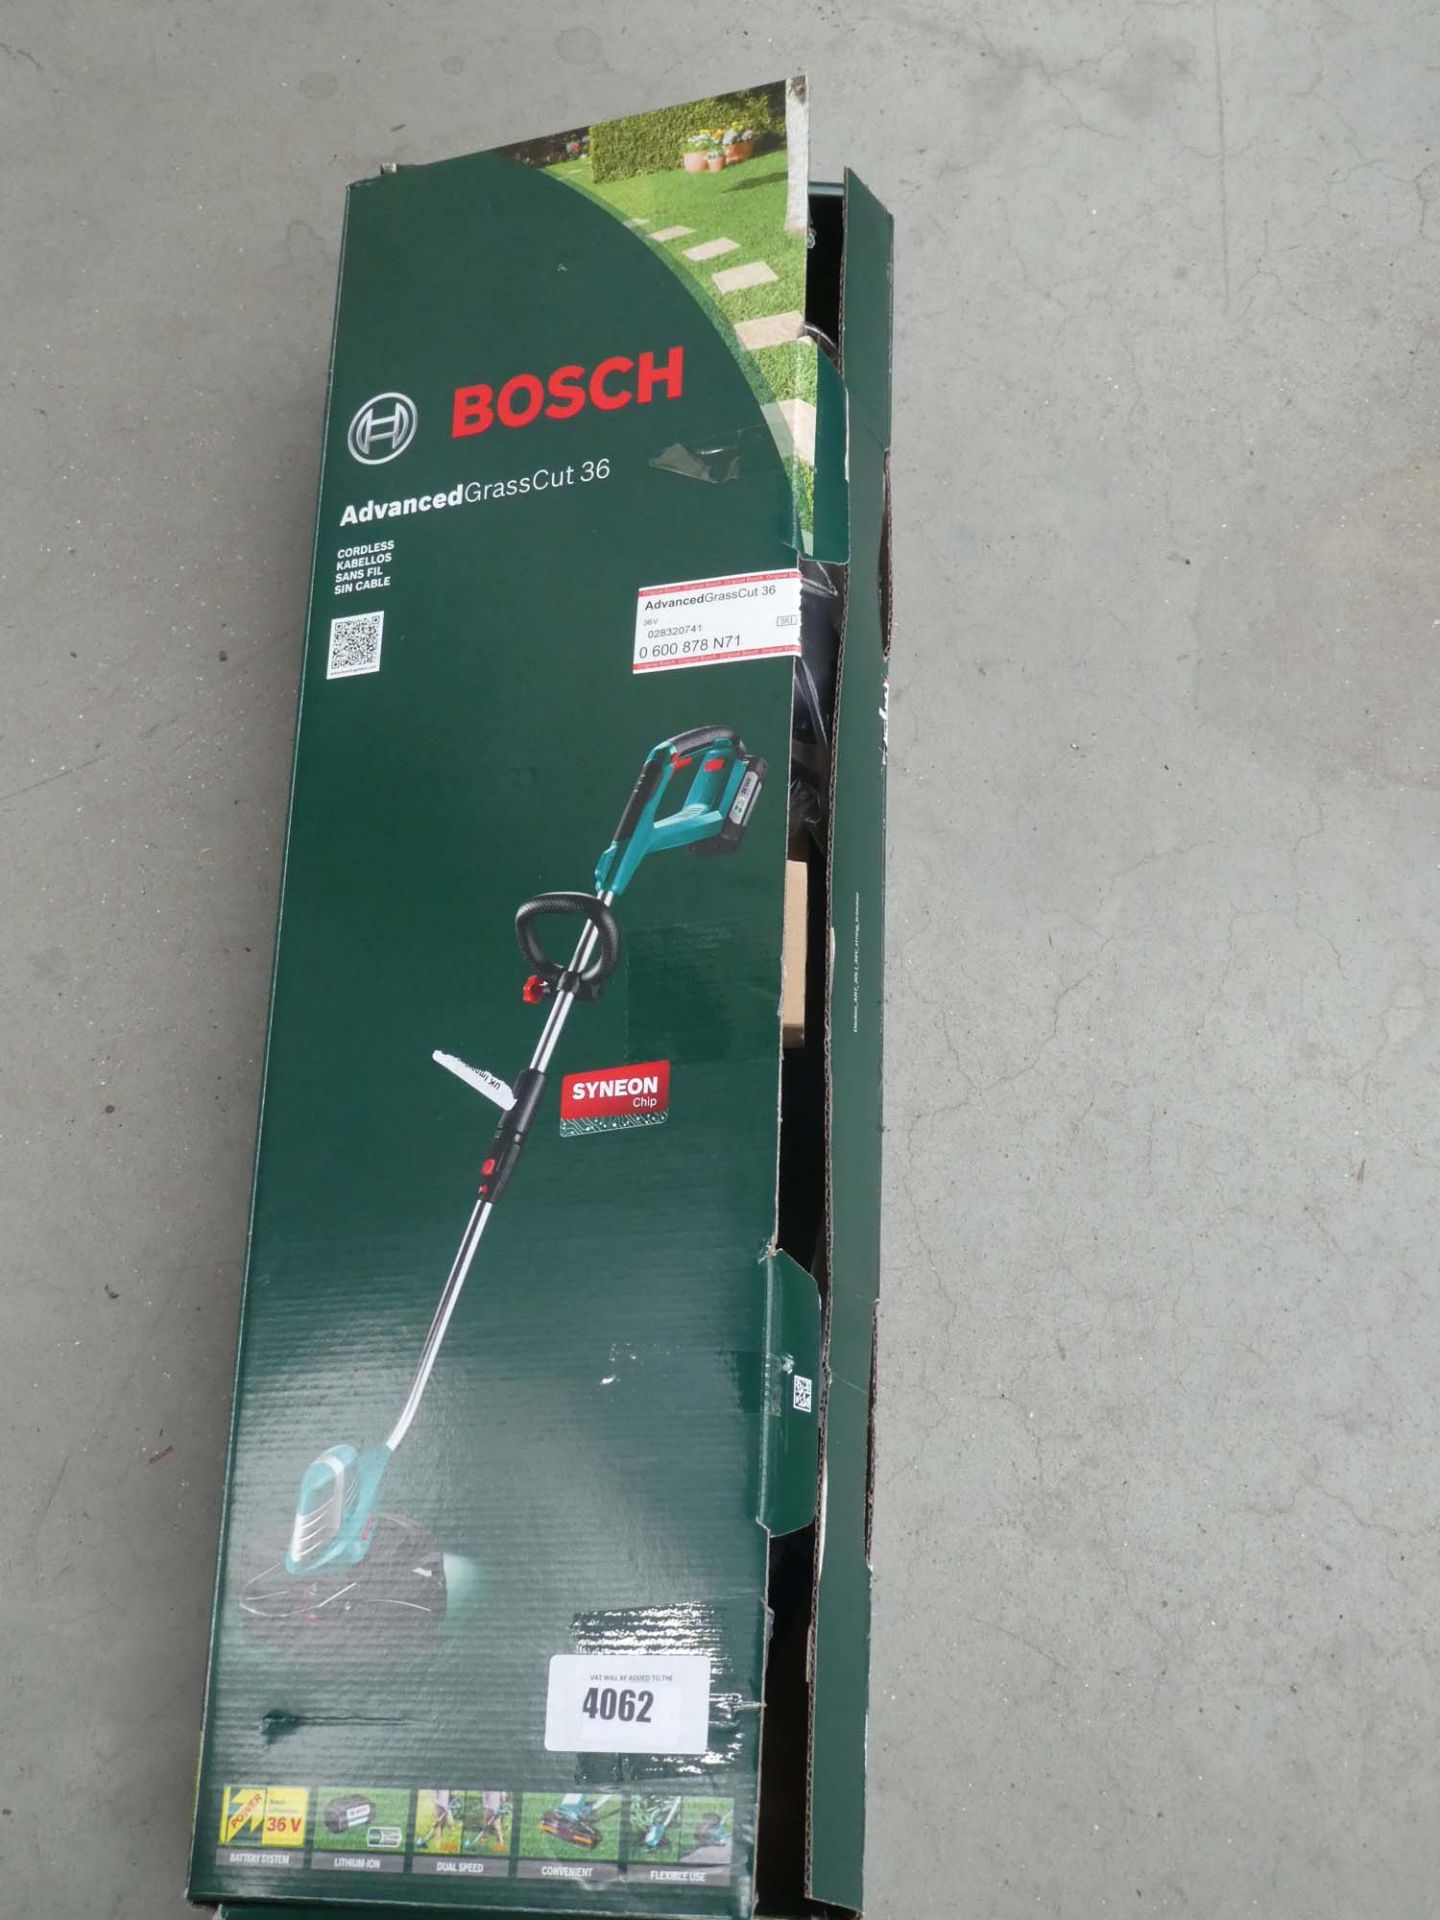 Bosch boxed battery powered strimmer (no battery, one charger)